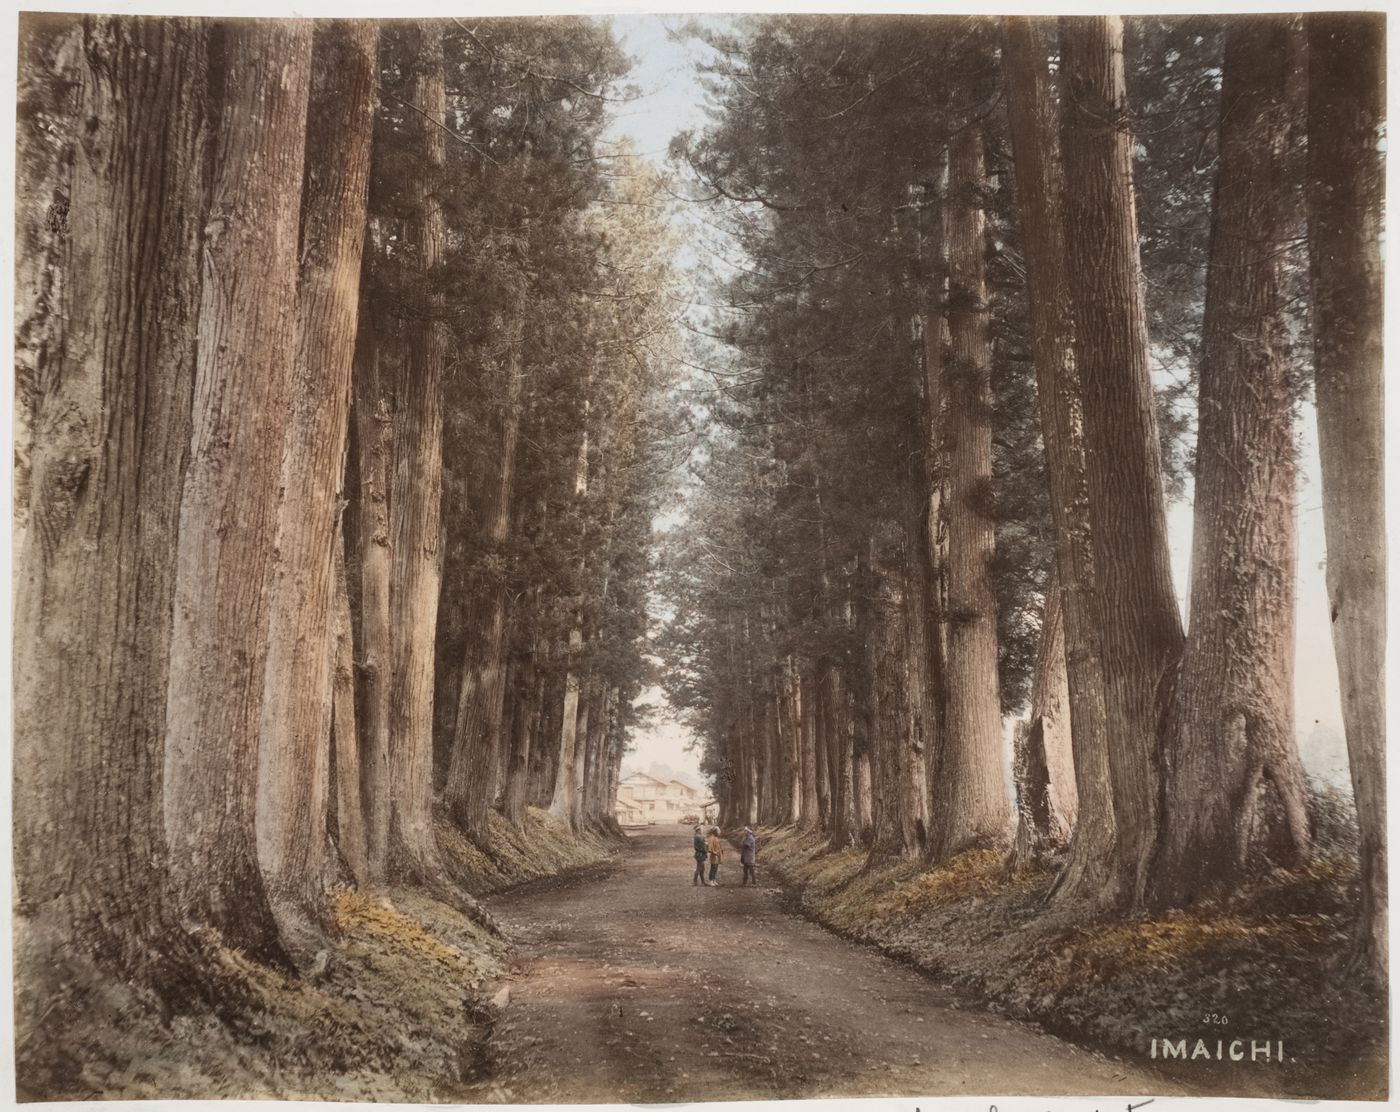 View of the cedar-lined Onari Kaido road showing buildings in the background, Imaichi, near Nikko, Japan